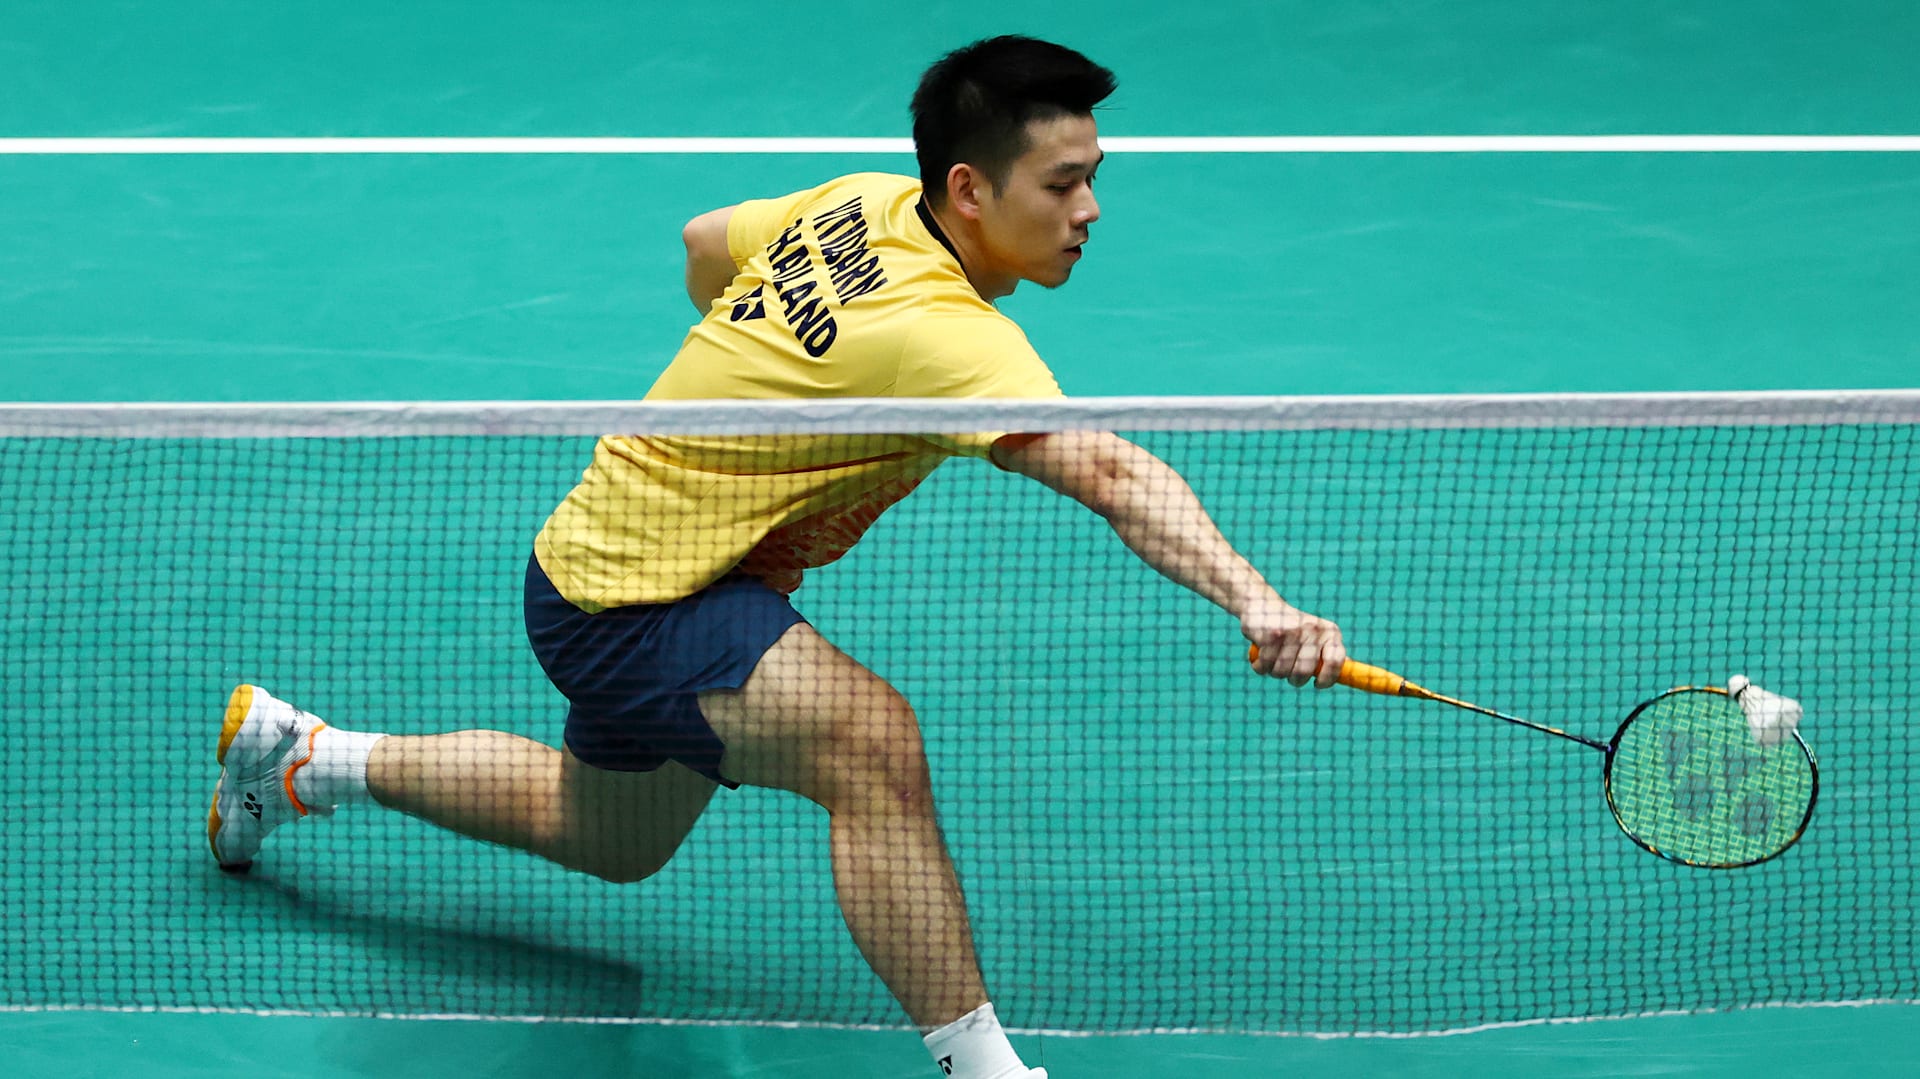 Previewing the Sports You Know Nothing About: Badminton